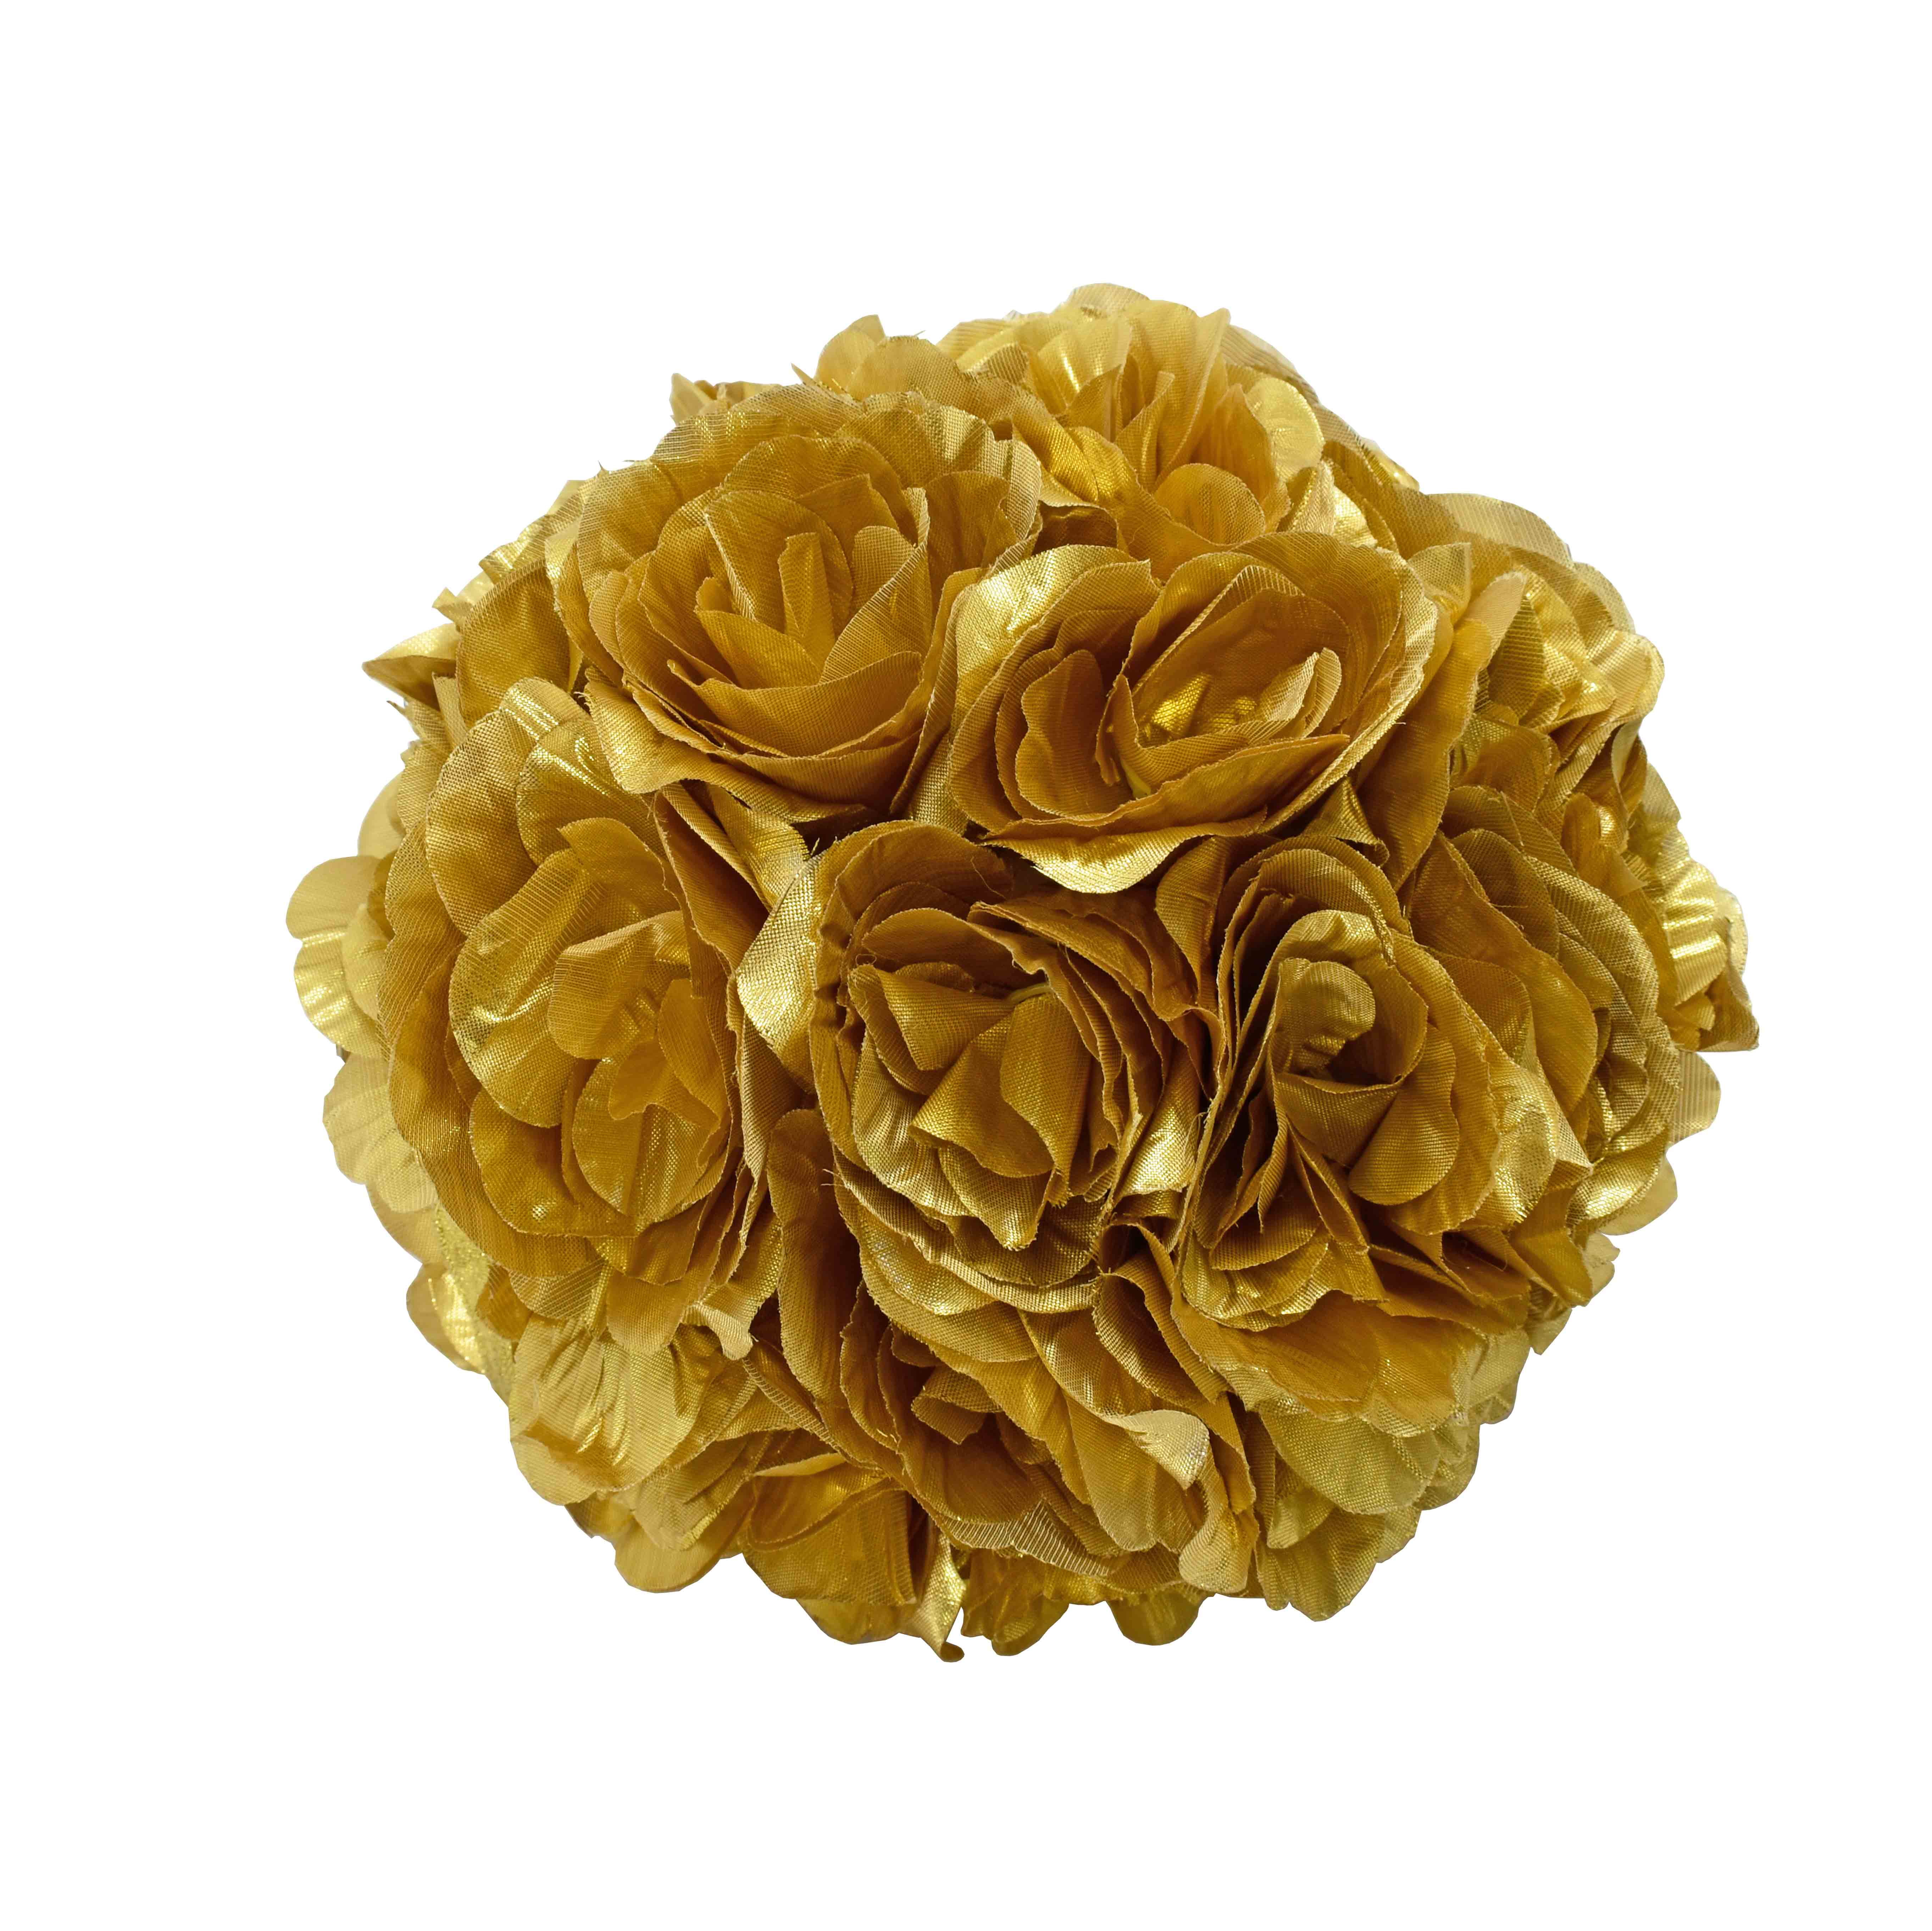 Craft and Party- 7" -10" Flower Ball Silk Rose Pomander Kissing Ball Decoration